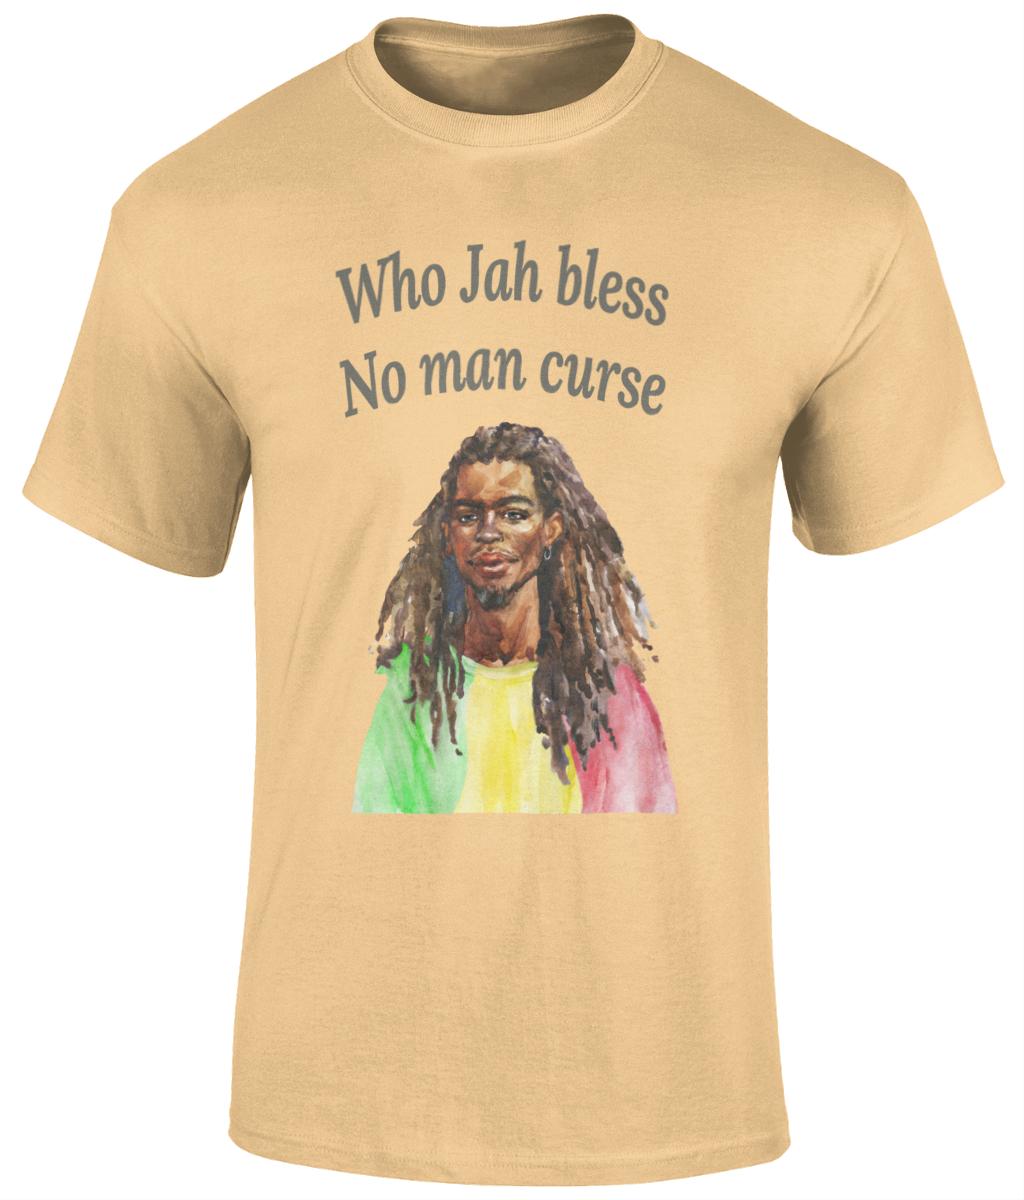 Who Jah Bless No Man Curse Rasta Man T-shirt - Various Colours Available - FAST UK DELIVERY